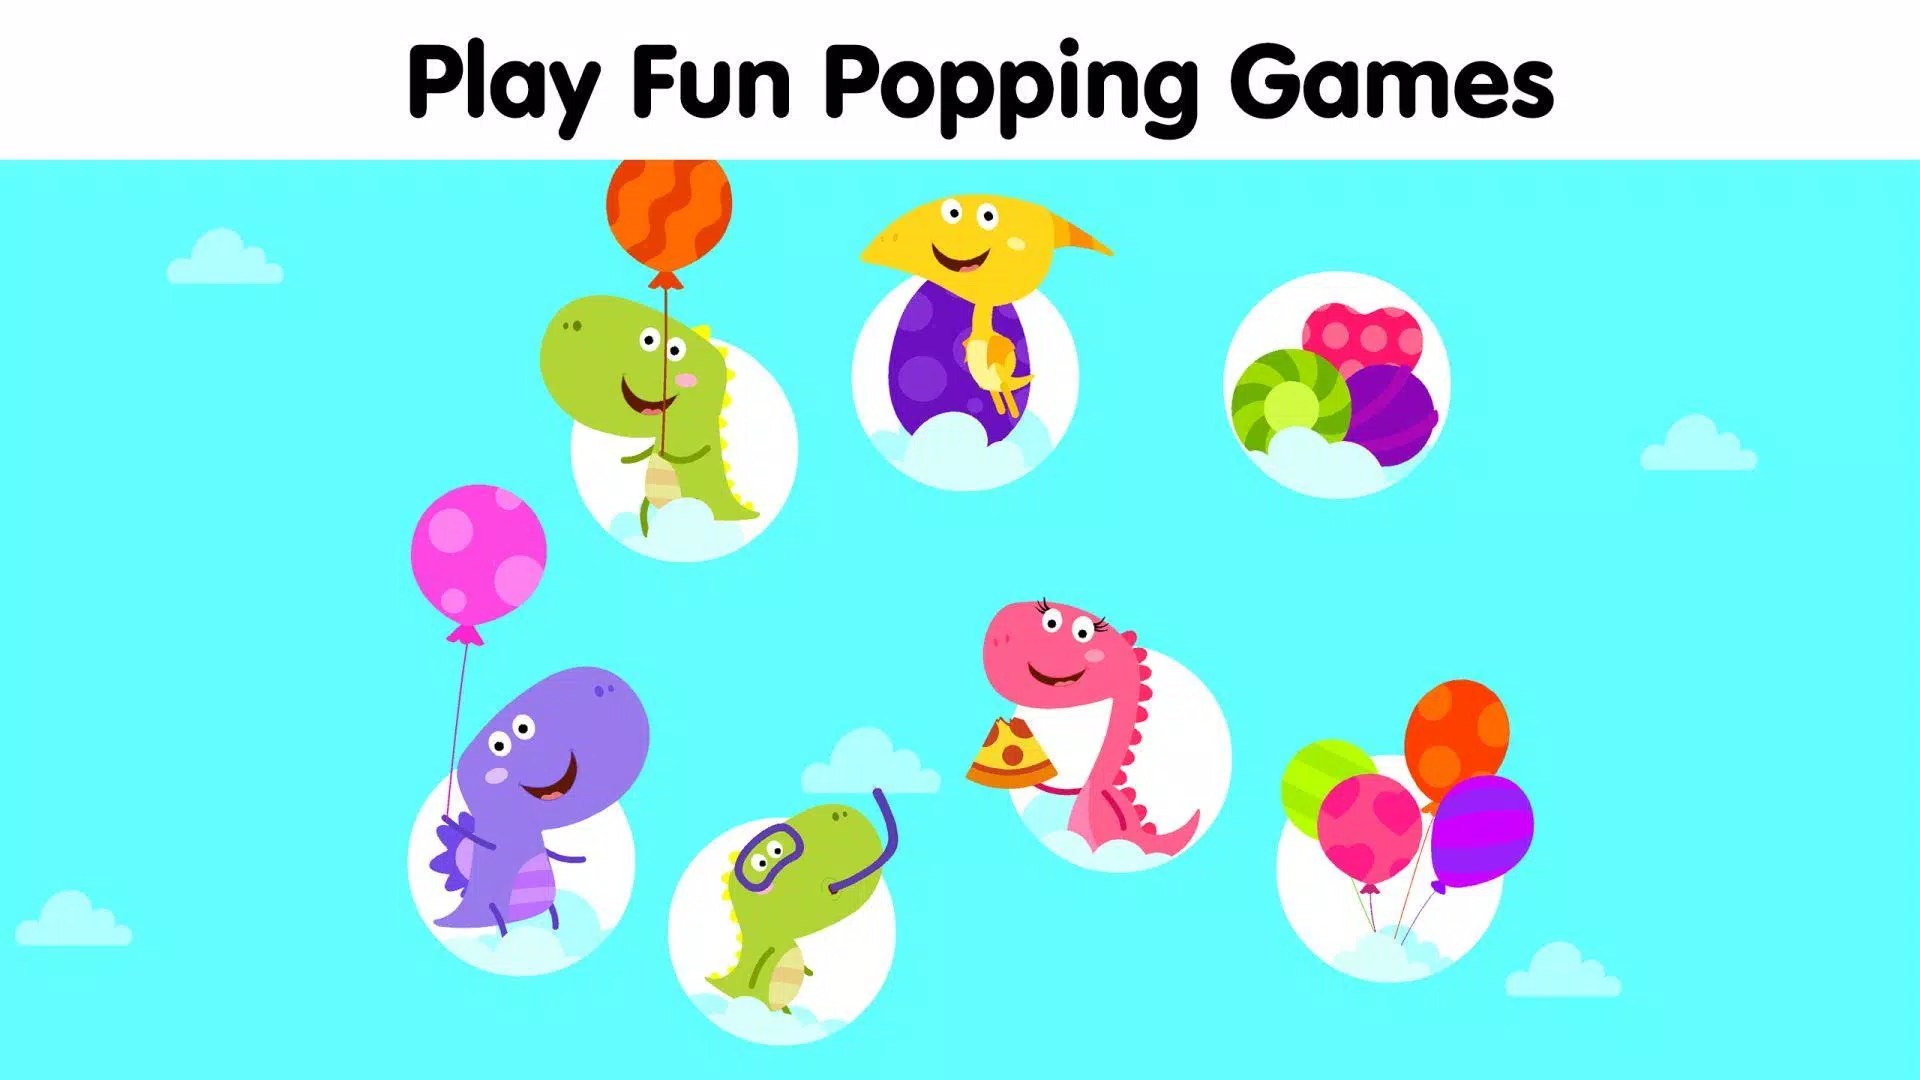 🎈Balloon Pop Games for Kids - Balloons Popping for Android - APK Download